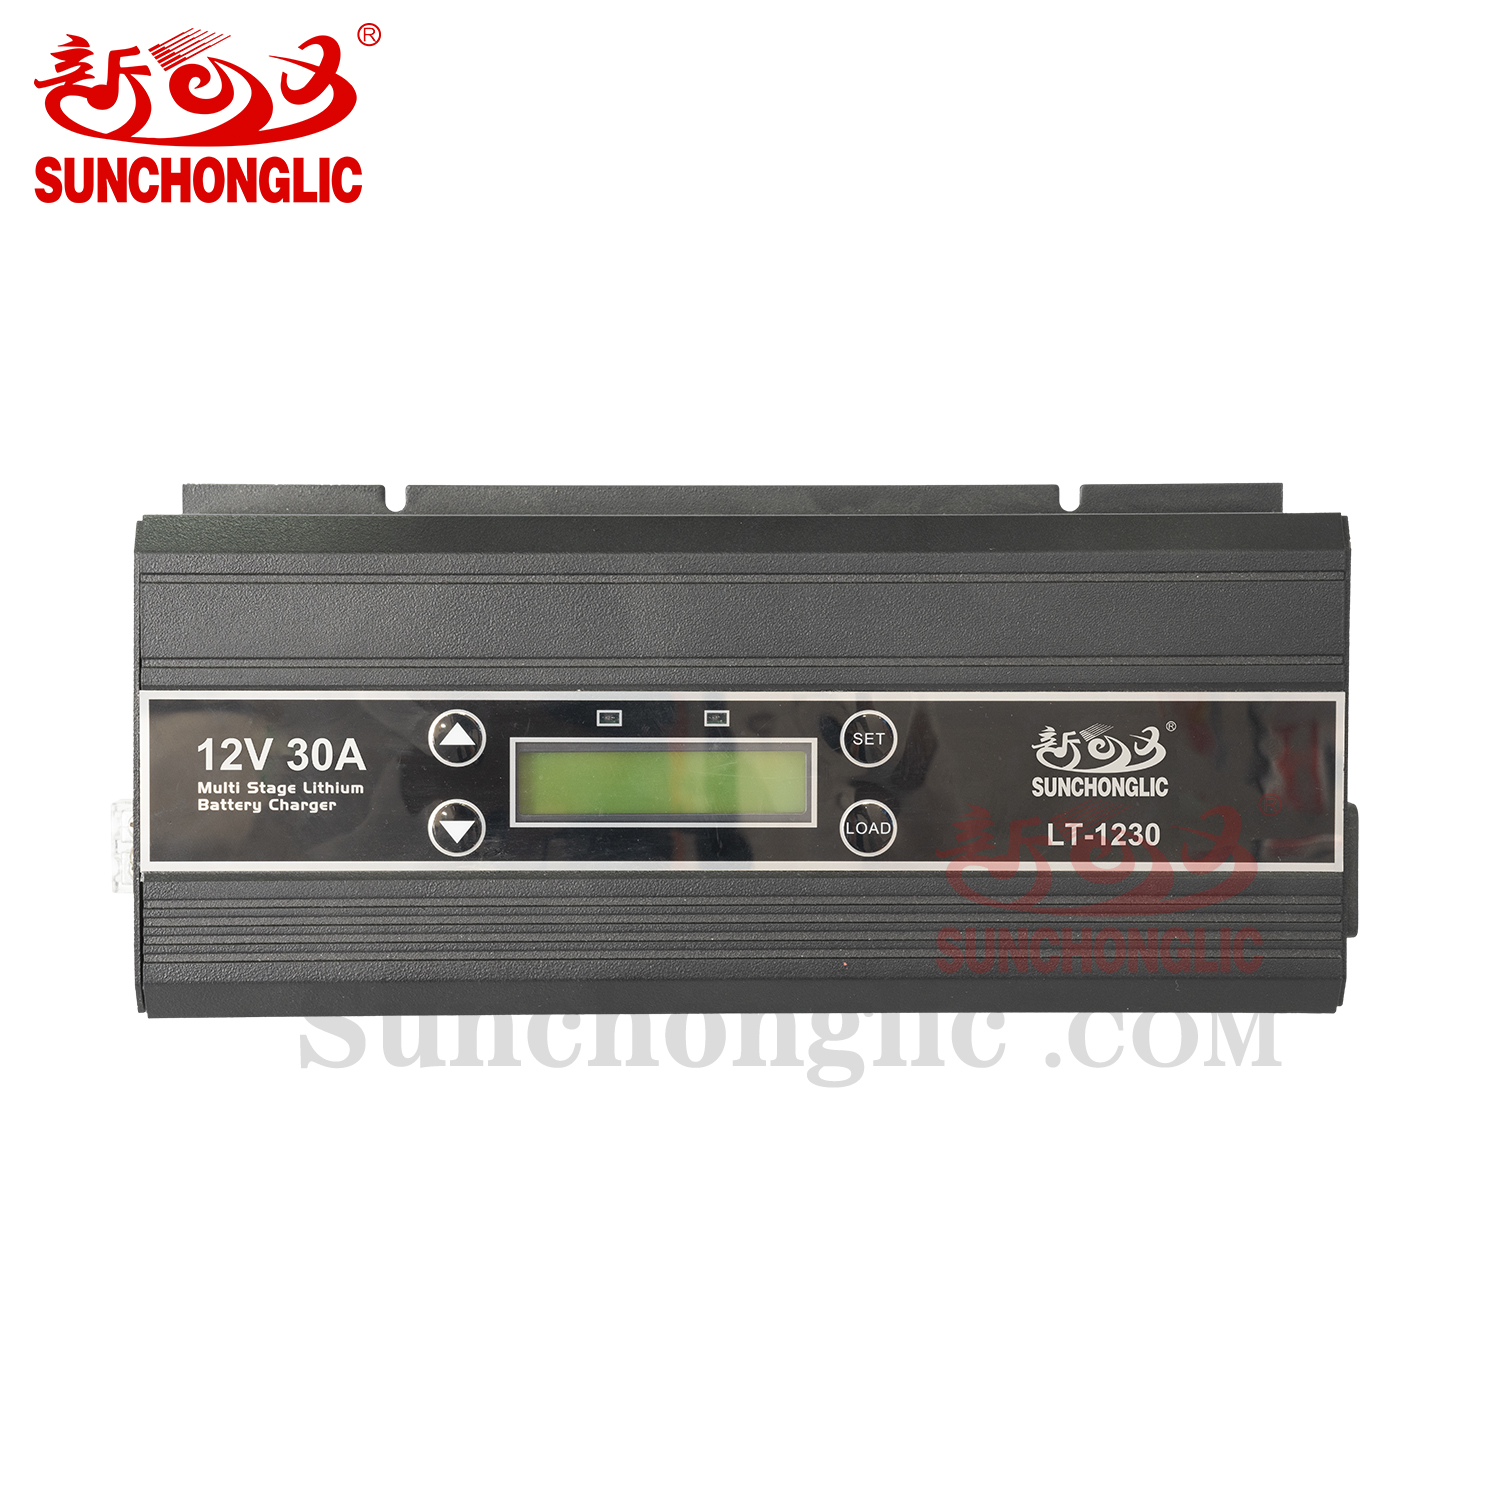 Sunchonglic 12V 30A 30amp lithium-ion battery charger